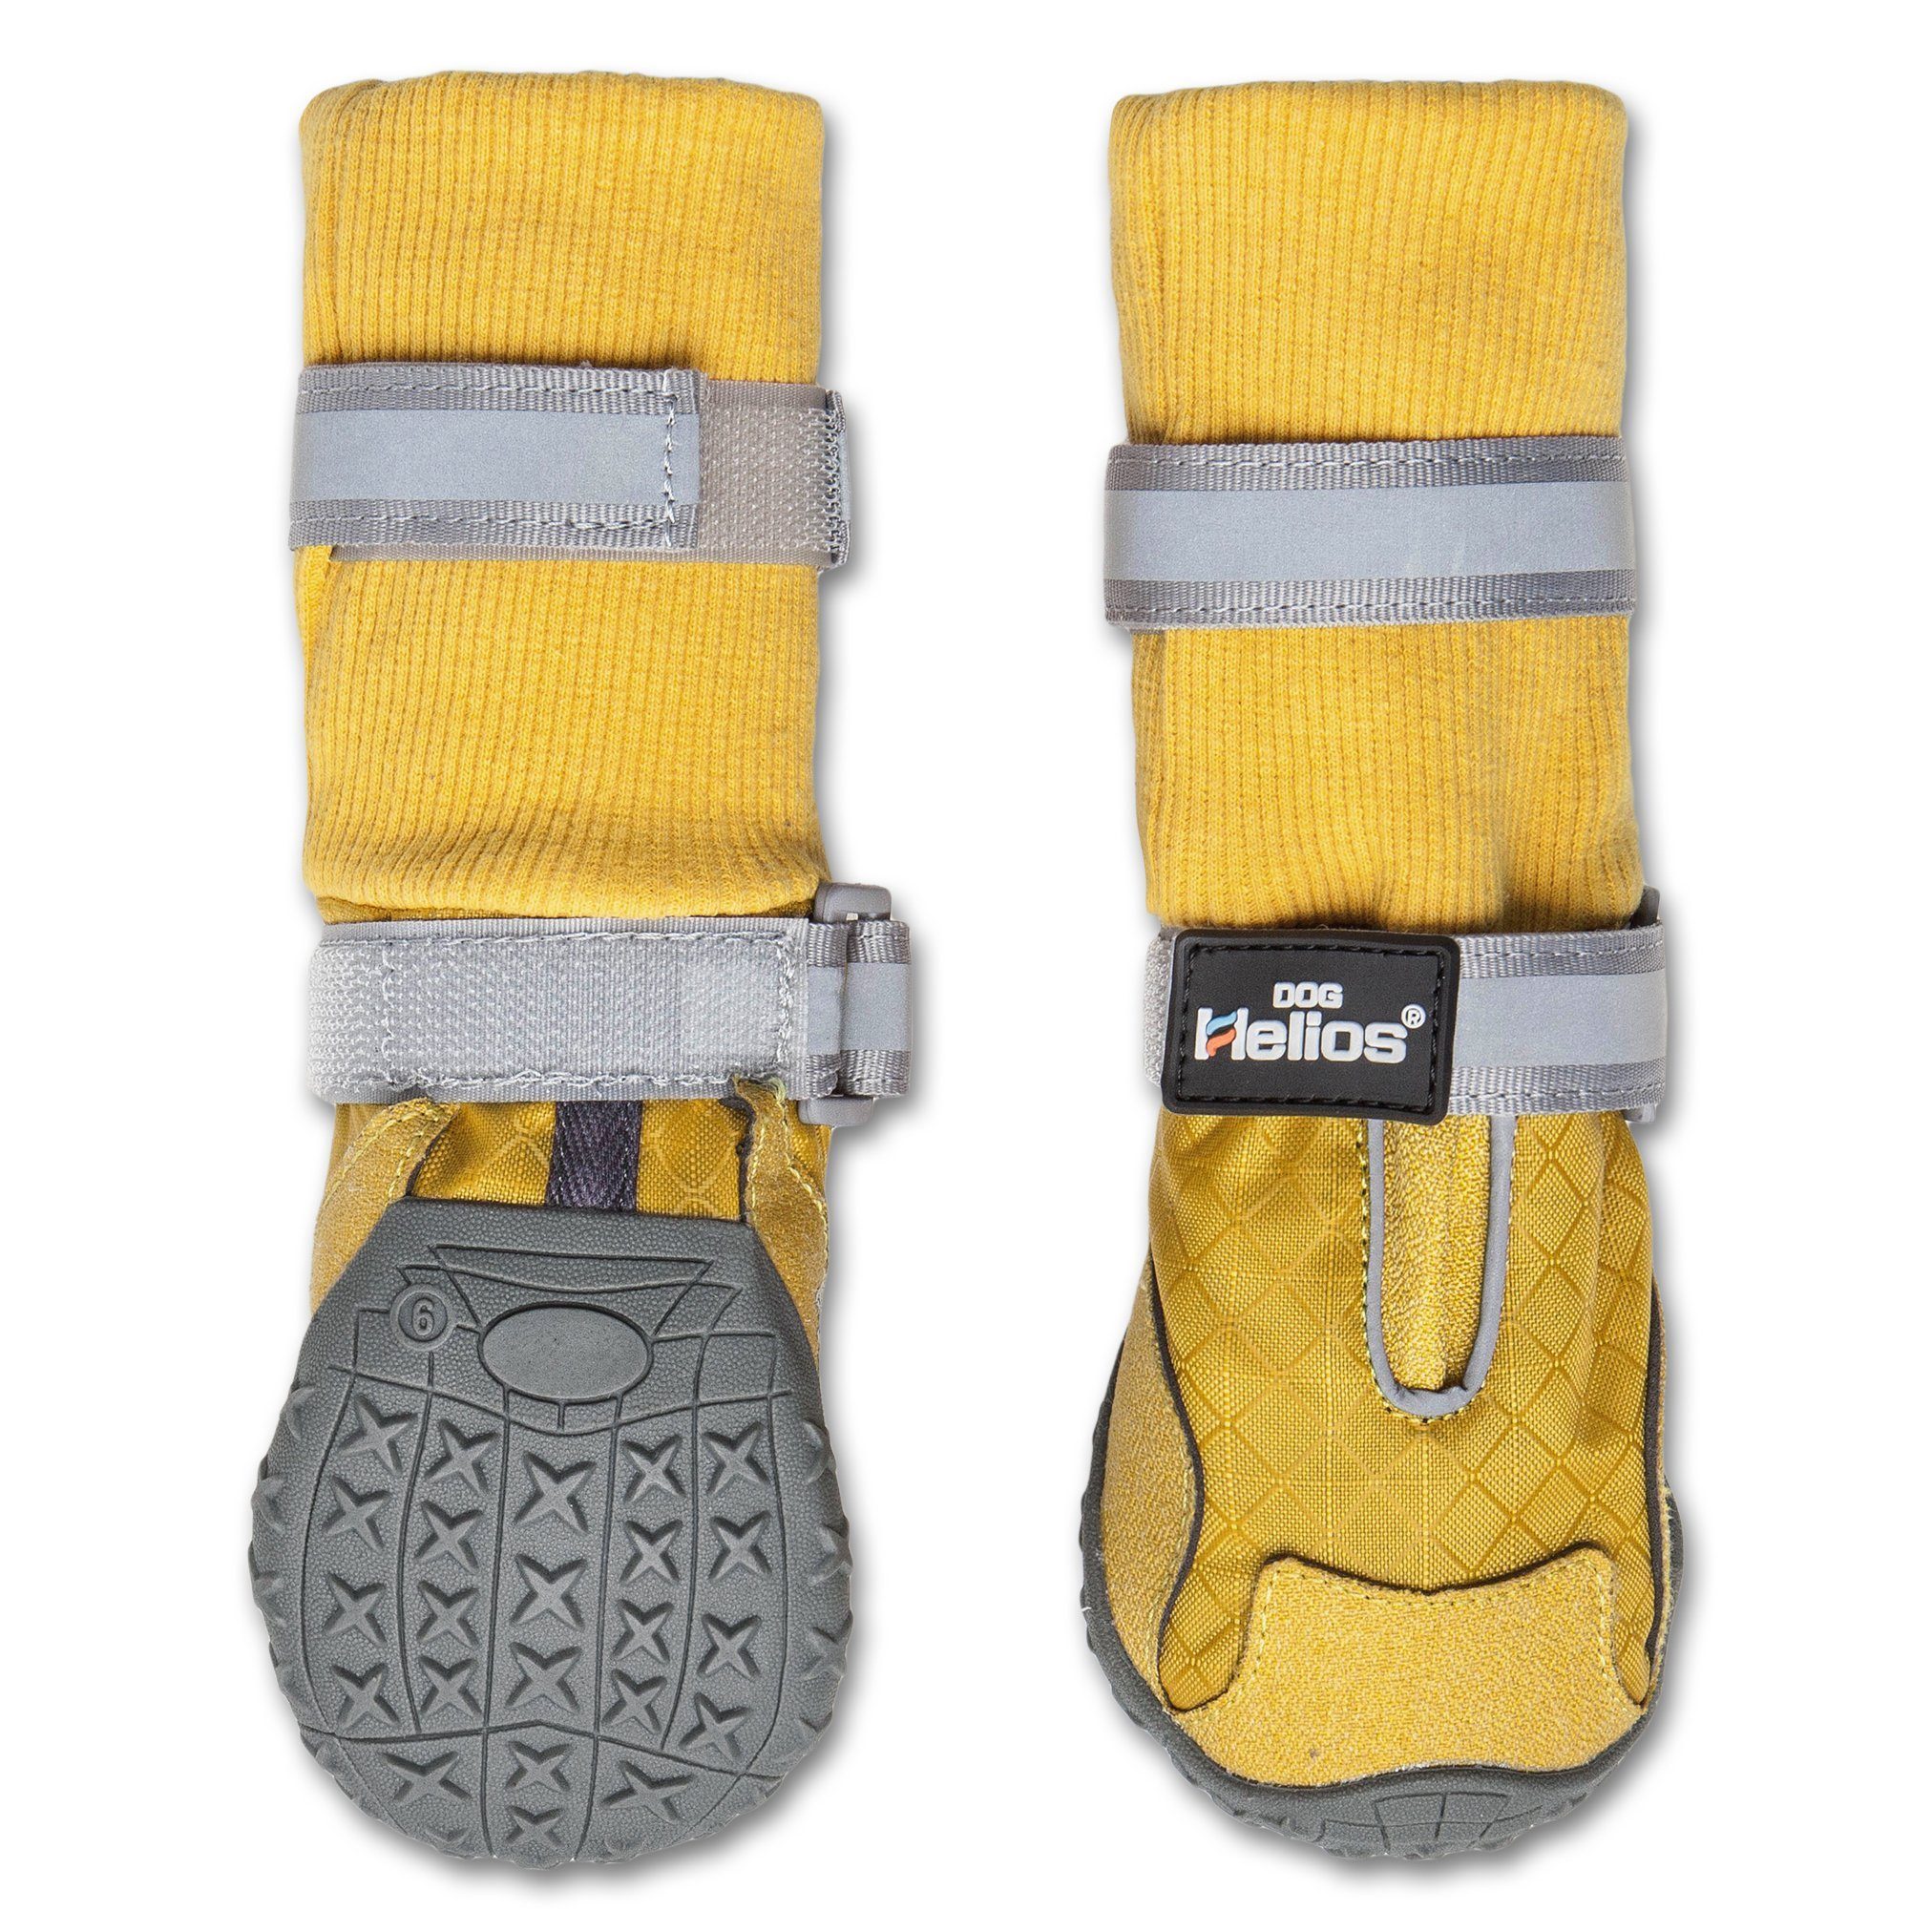 Dog Helios 'Traverse' Premium Grip High-Ankle Outdoor Dog Boots - Set Of 4 X-Small Yellow